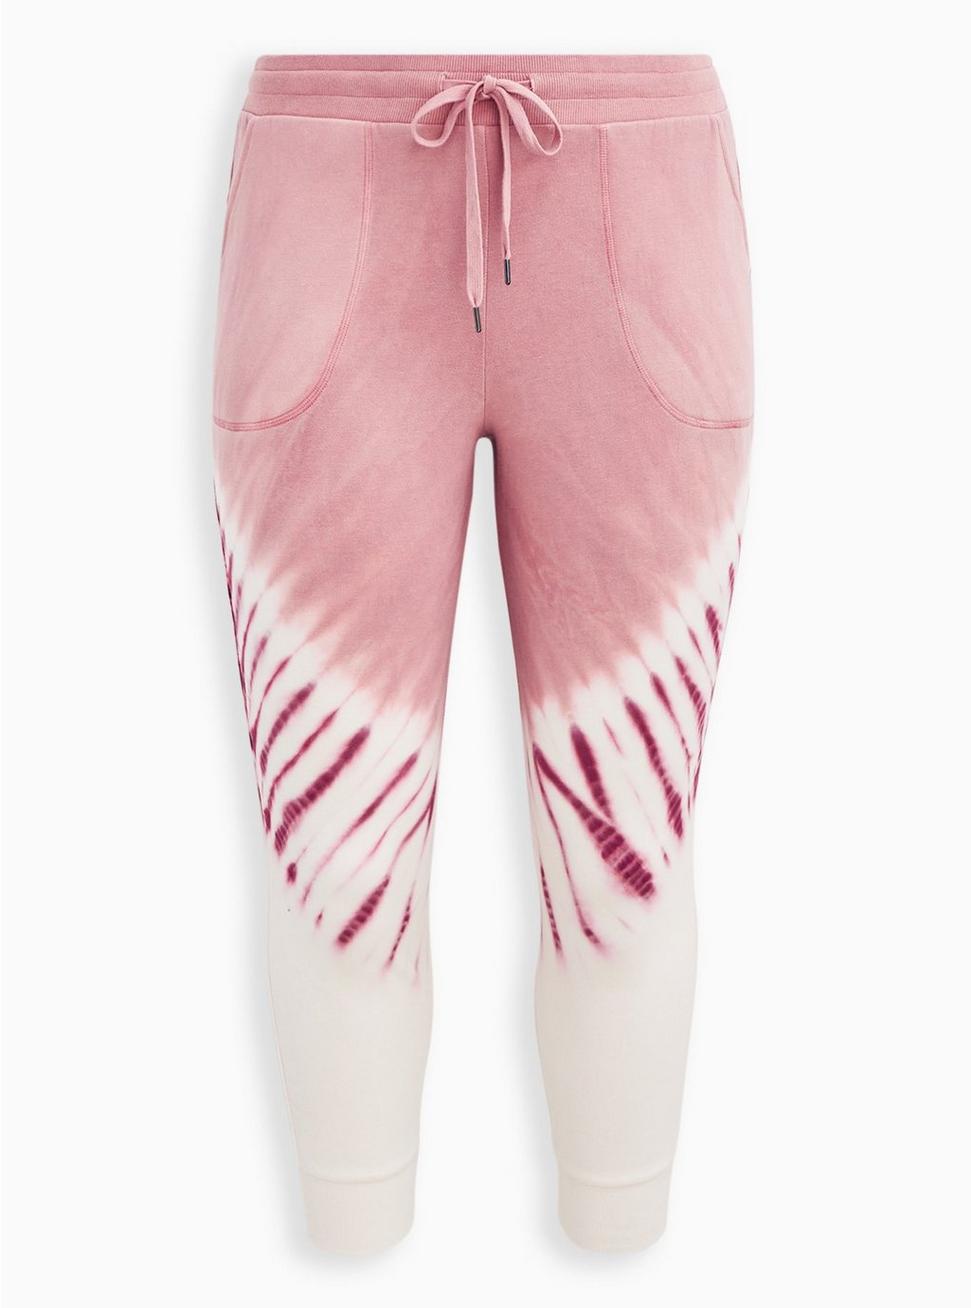 Everyday Fleece Crop Active Jogger In Classic Fit, BCA PINK IVORY, hi-res